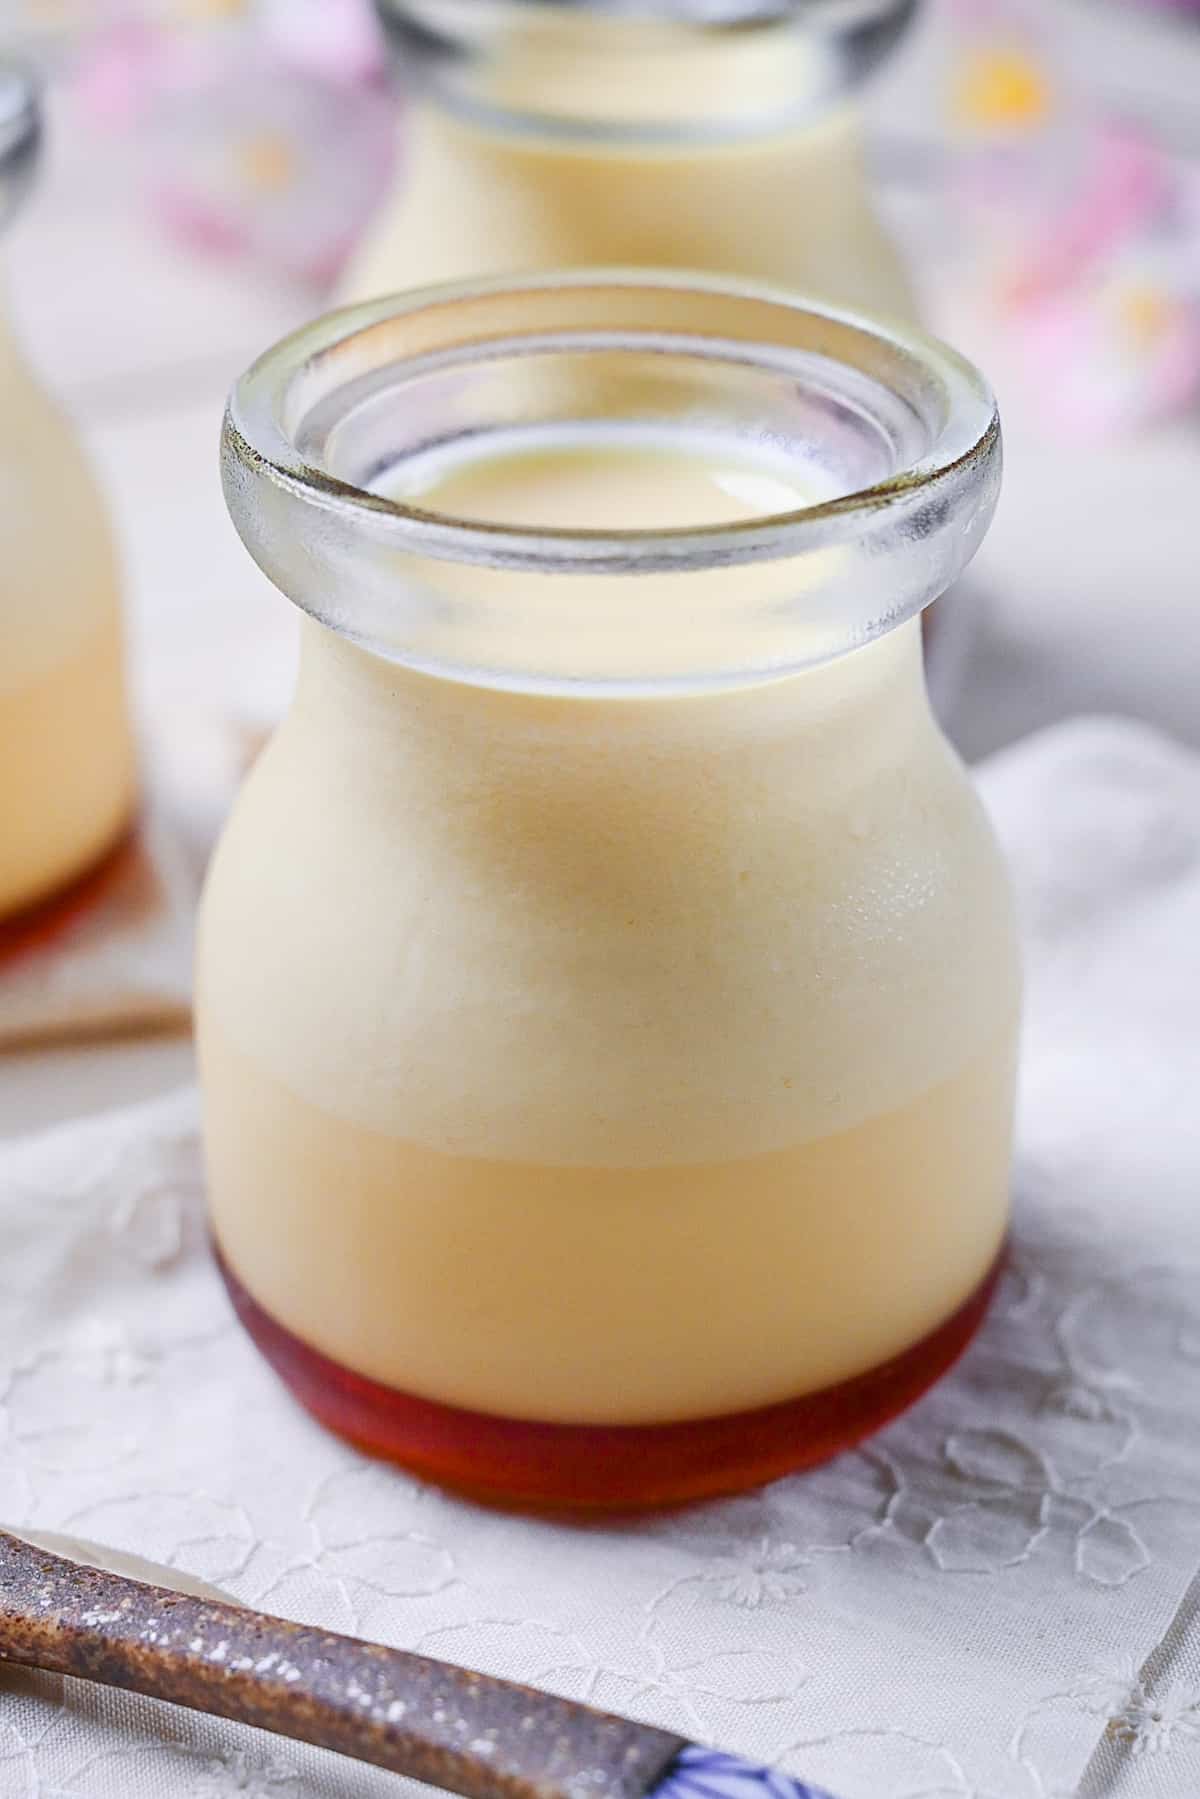 Japanese style custard pudding (purin) in glass jars